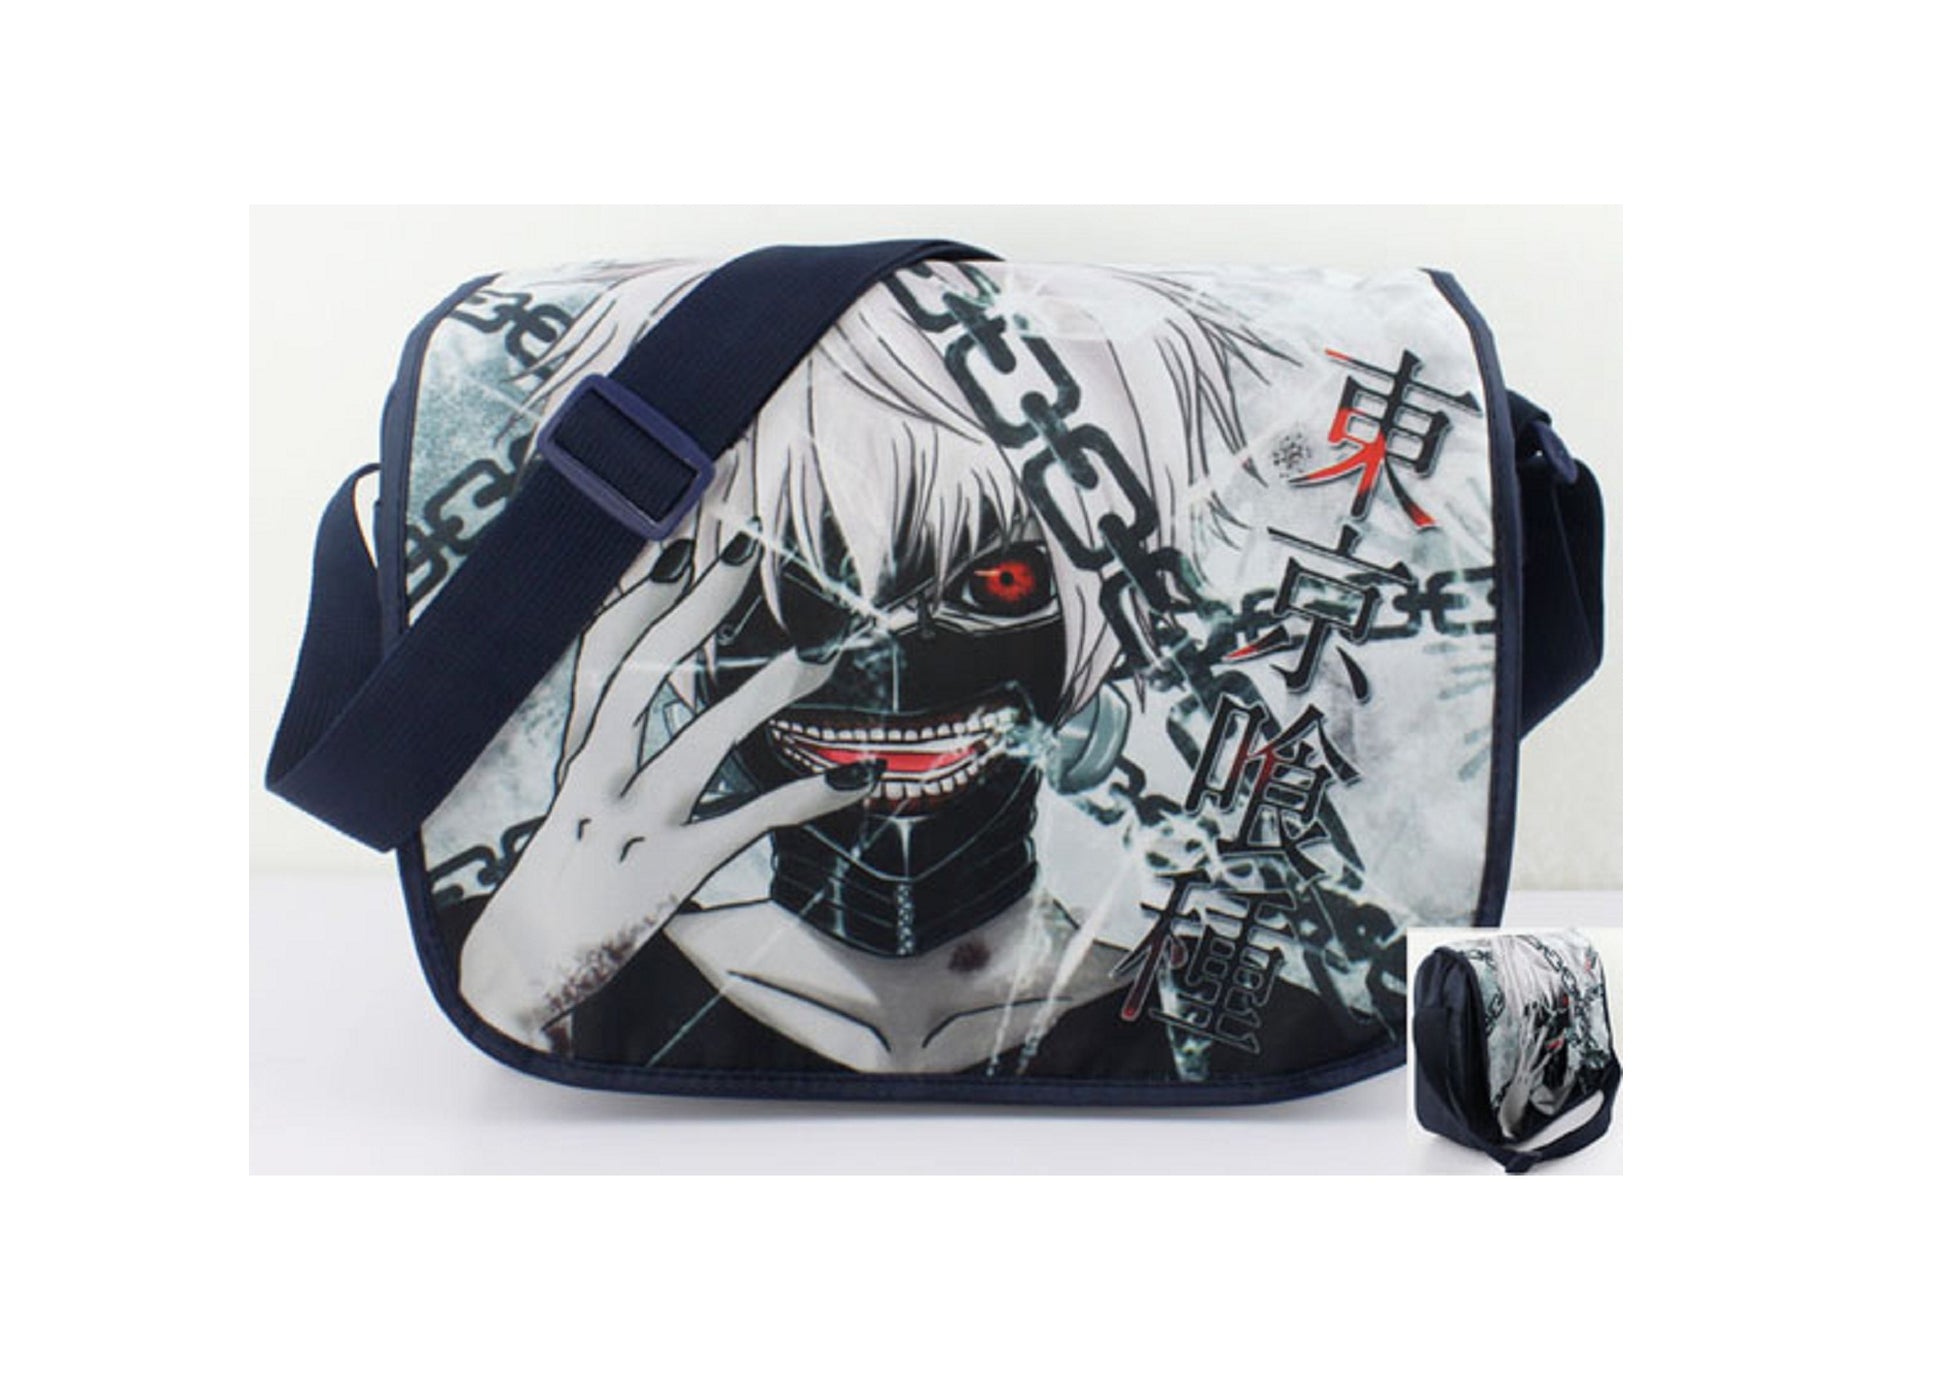 Tokyo Ghoul Messenger Bag - Super Anime Store FREE SHIPPING FAST SHIPPING USA